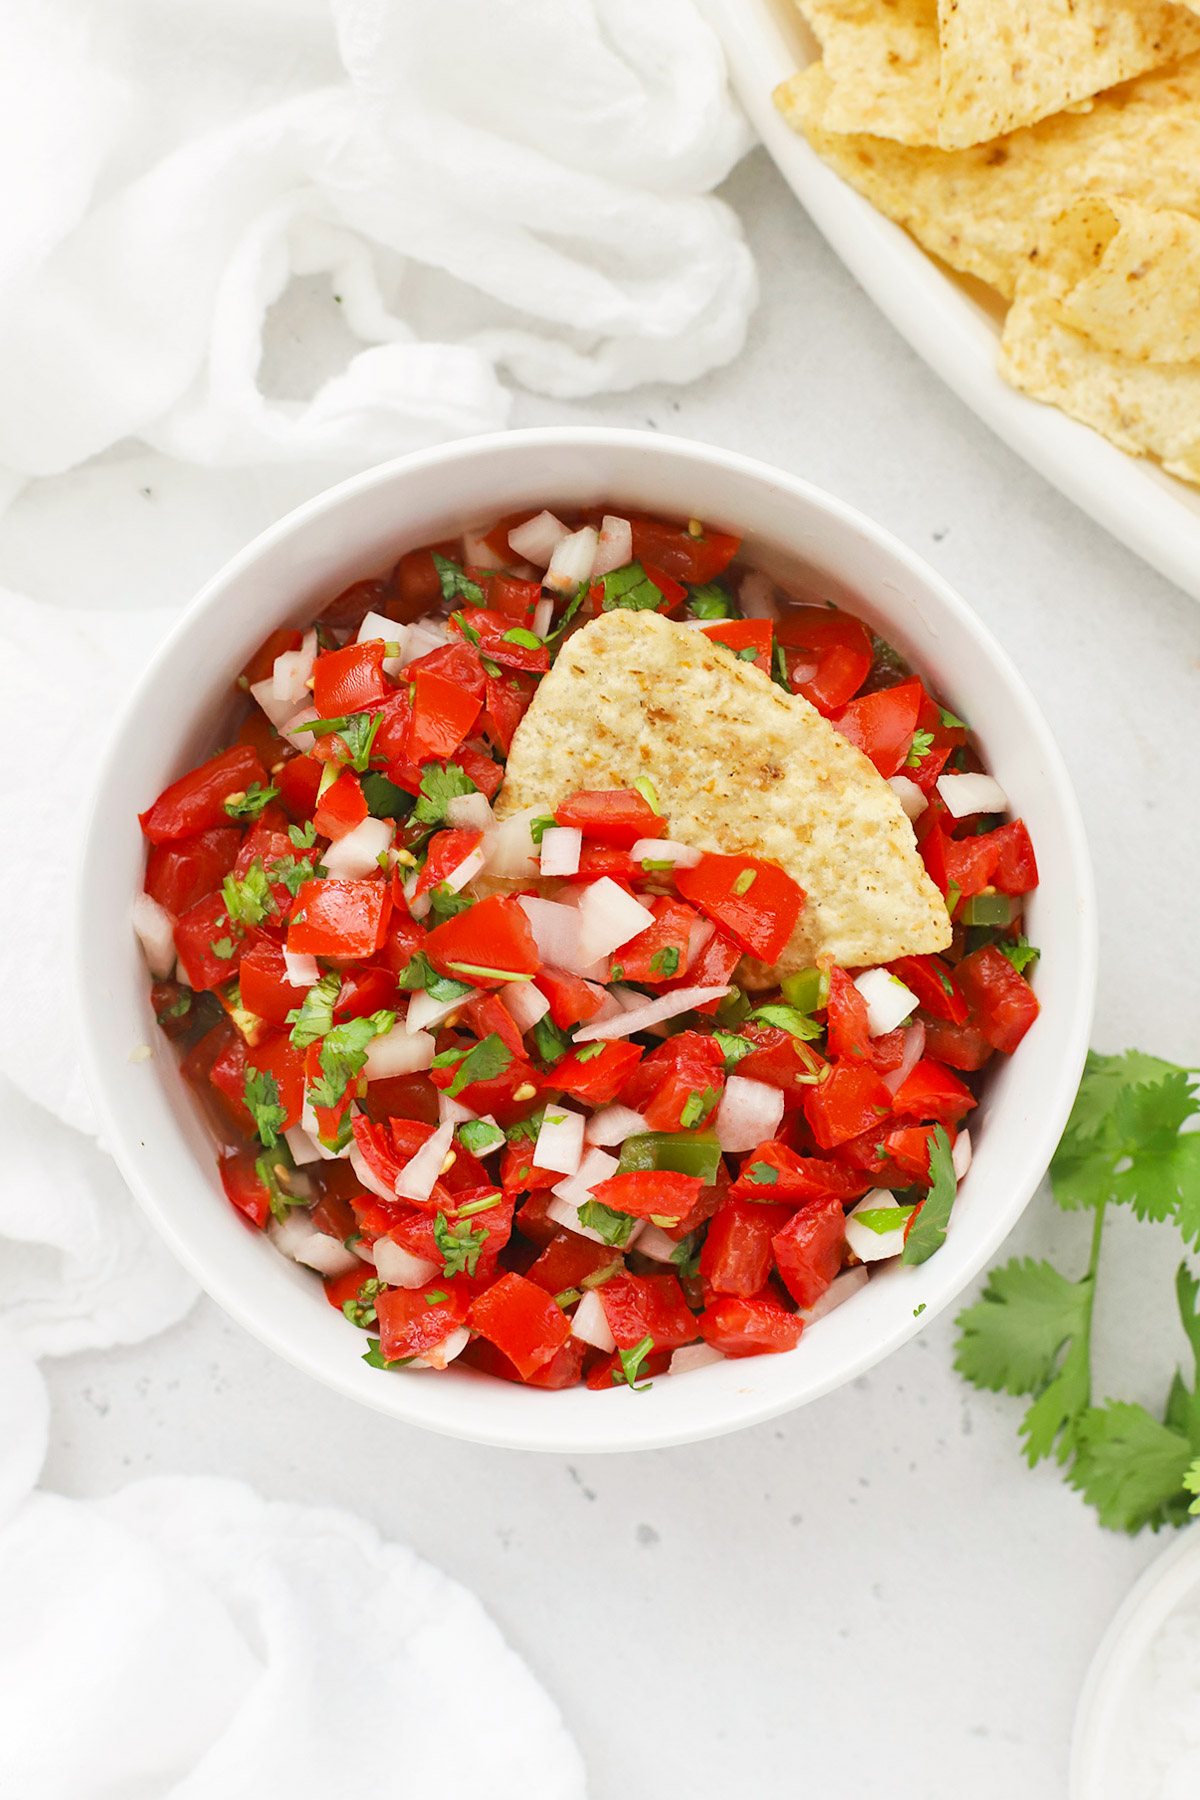 Overhead view of a bowl of authentic pico de gallo with chips